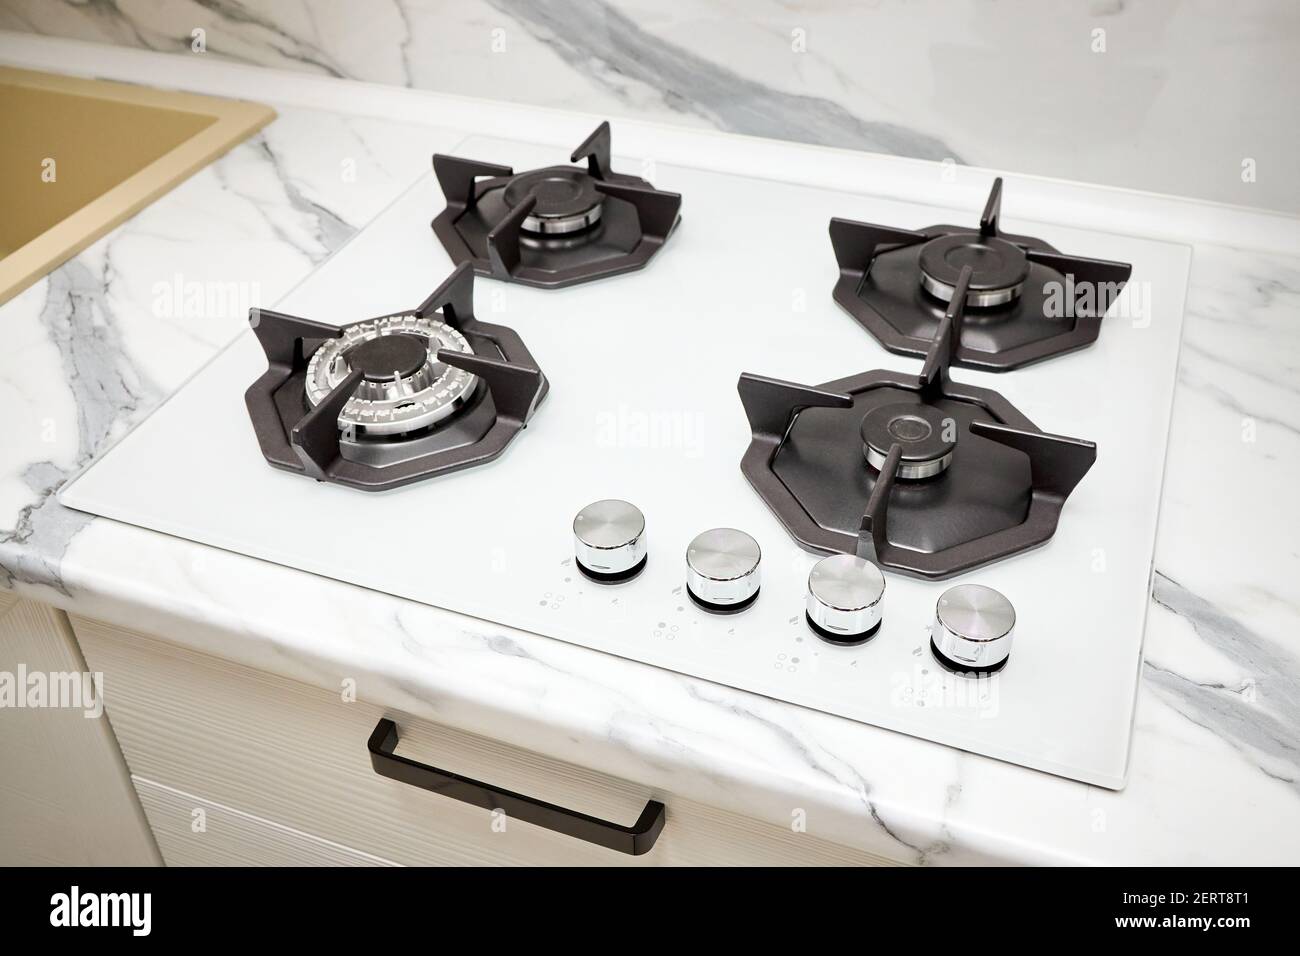 Modern gas stove on counter top white closeup. Hob gas stove using natural  gas or propane for cooking products on light countertop for cooking Stock  Photo - Alamy